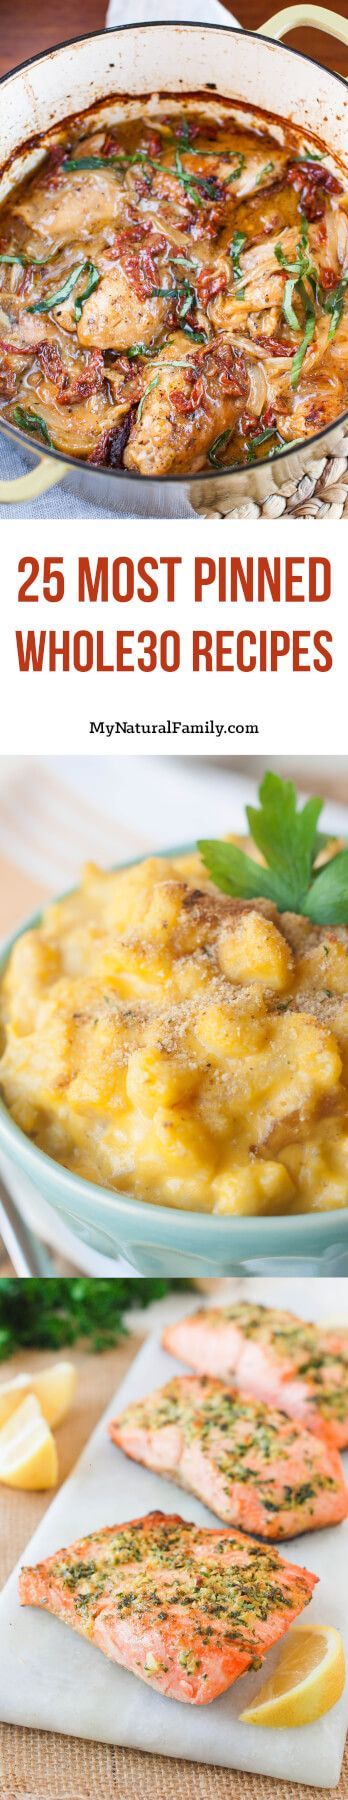 Contents2. Whole30 Mac and Cheese Recipe3. Whole30 Lemon Garlic Herb Crusted Salmo